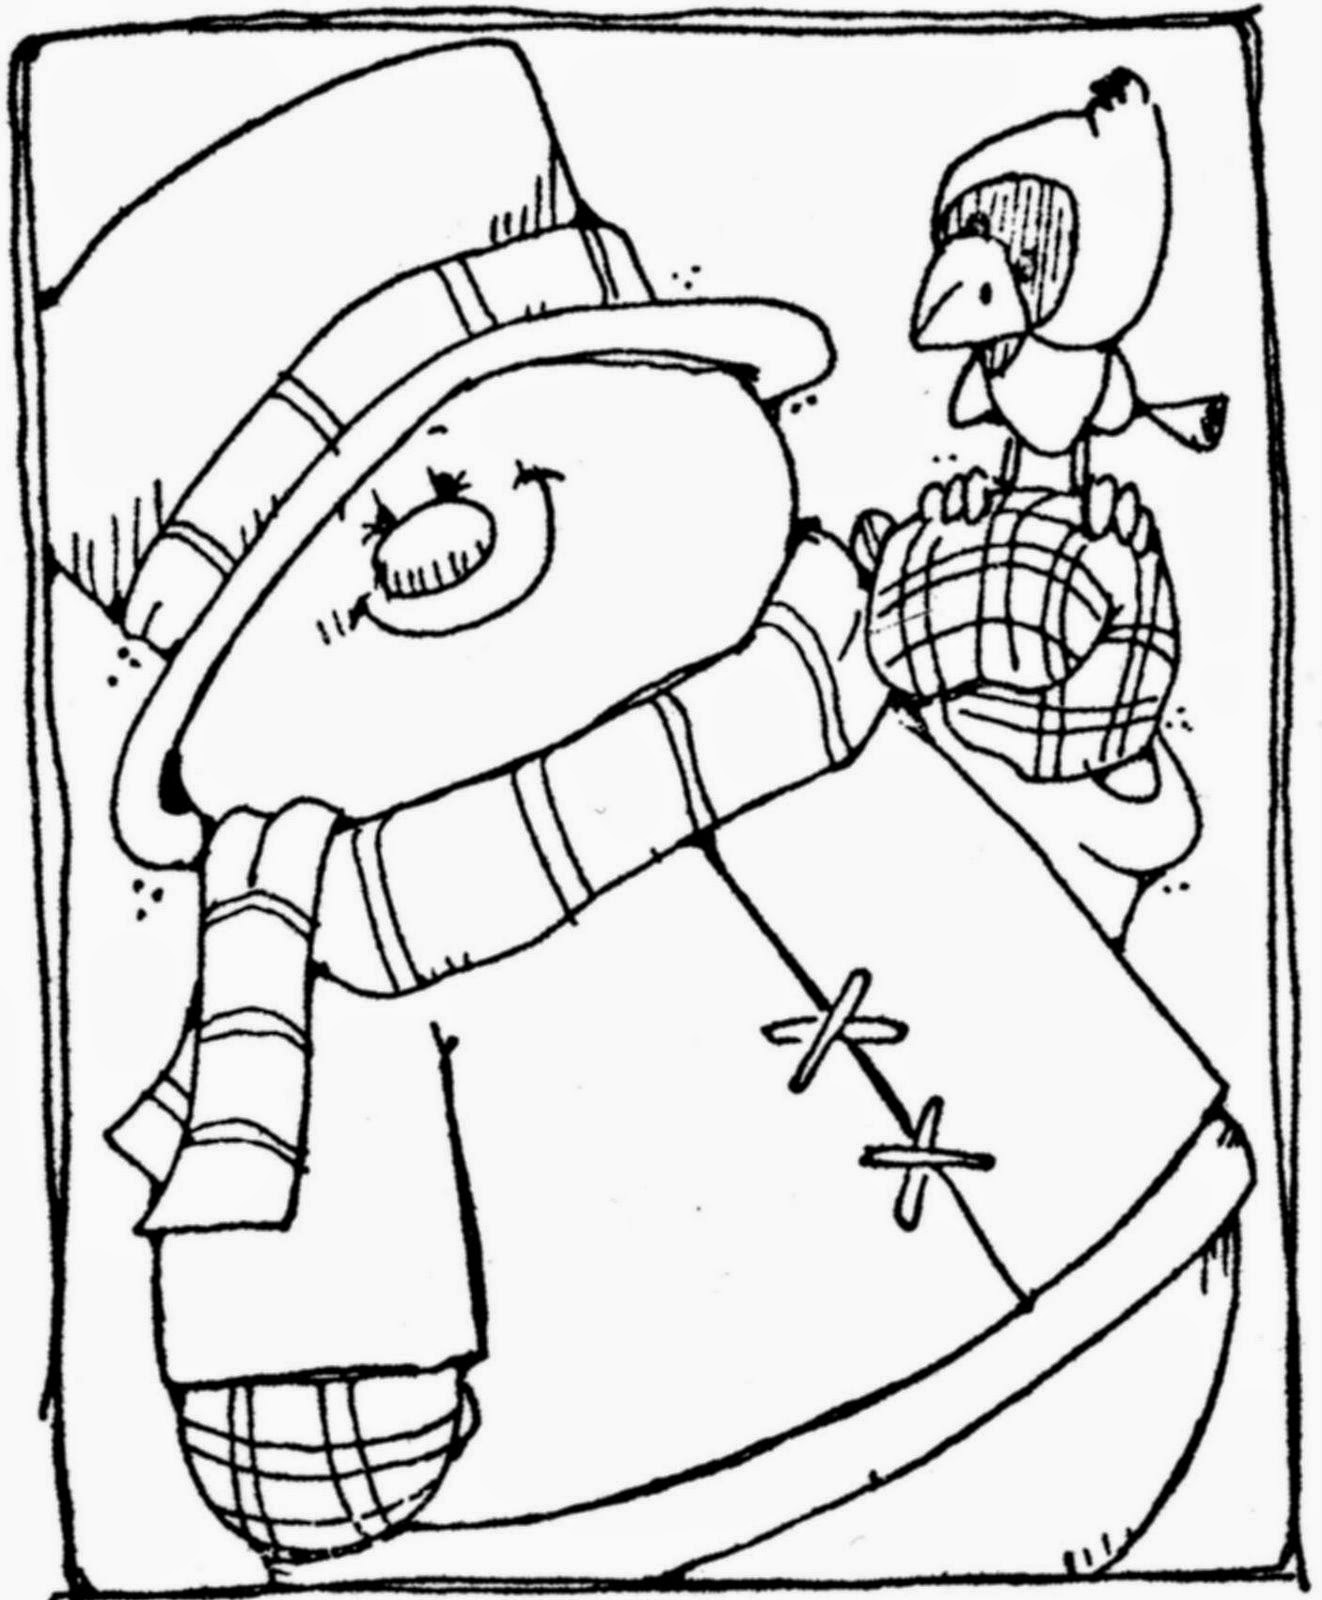 Download Cute Snowmen Free Printable Coloring Pages. - Oh My Fiesta! in english